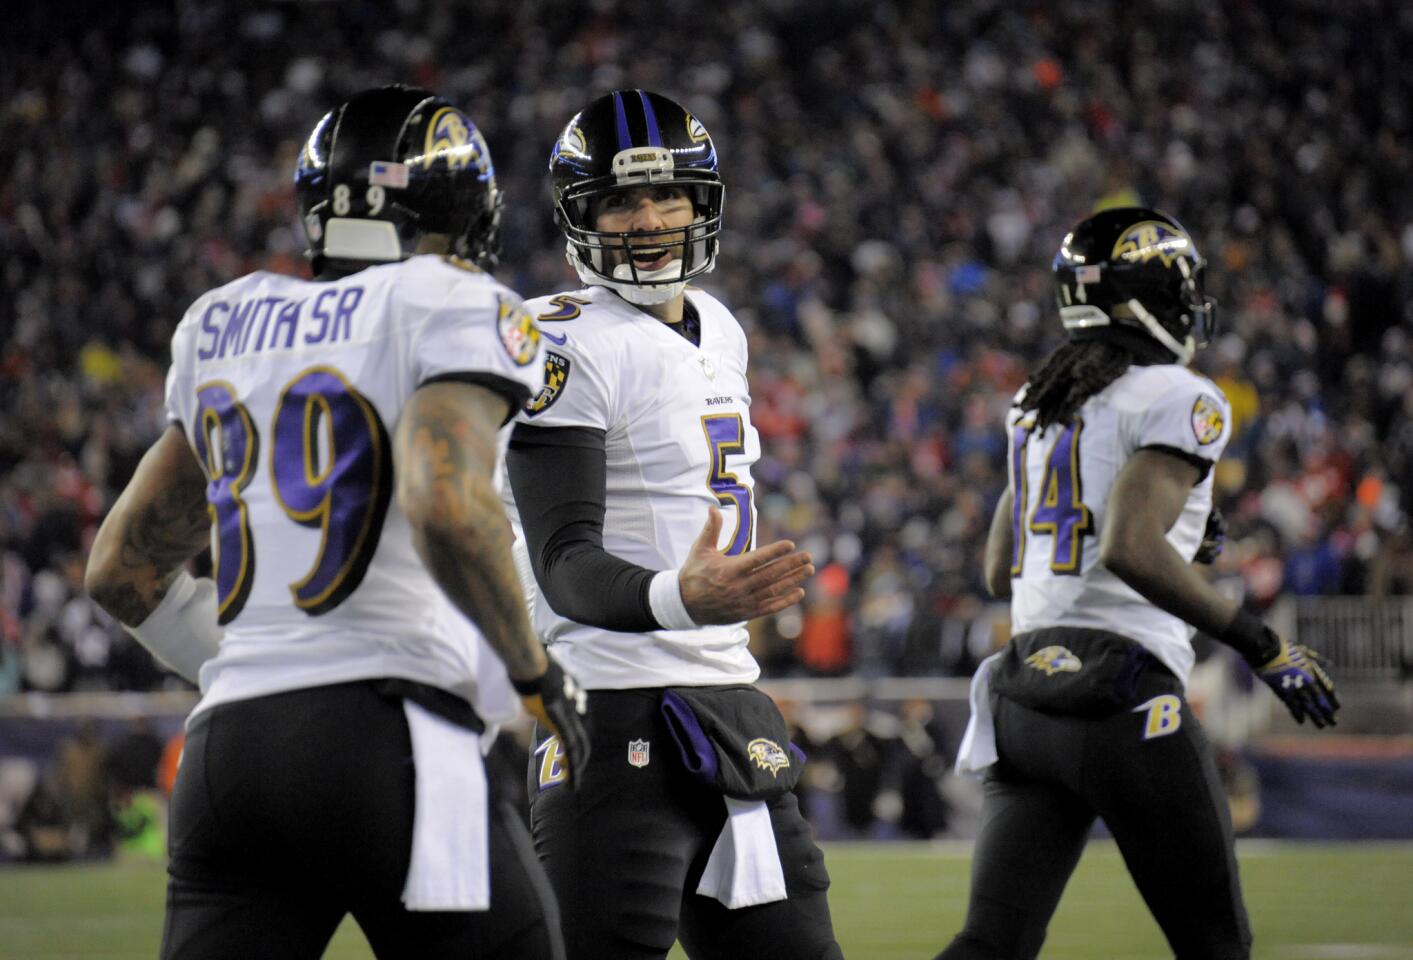 Joe Flacco played brilliantly in the first half but got rattled in the second once he started to get hit and after he threw his first interception. The second interception was a bad decision and Flacco shouldn't have attempted the pass with 1:39 remaining. He played well enough to win.